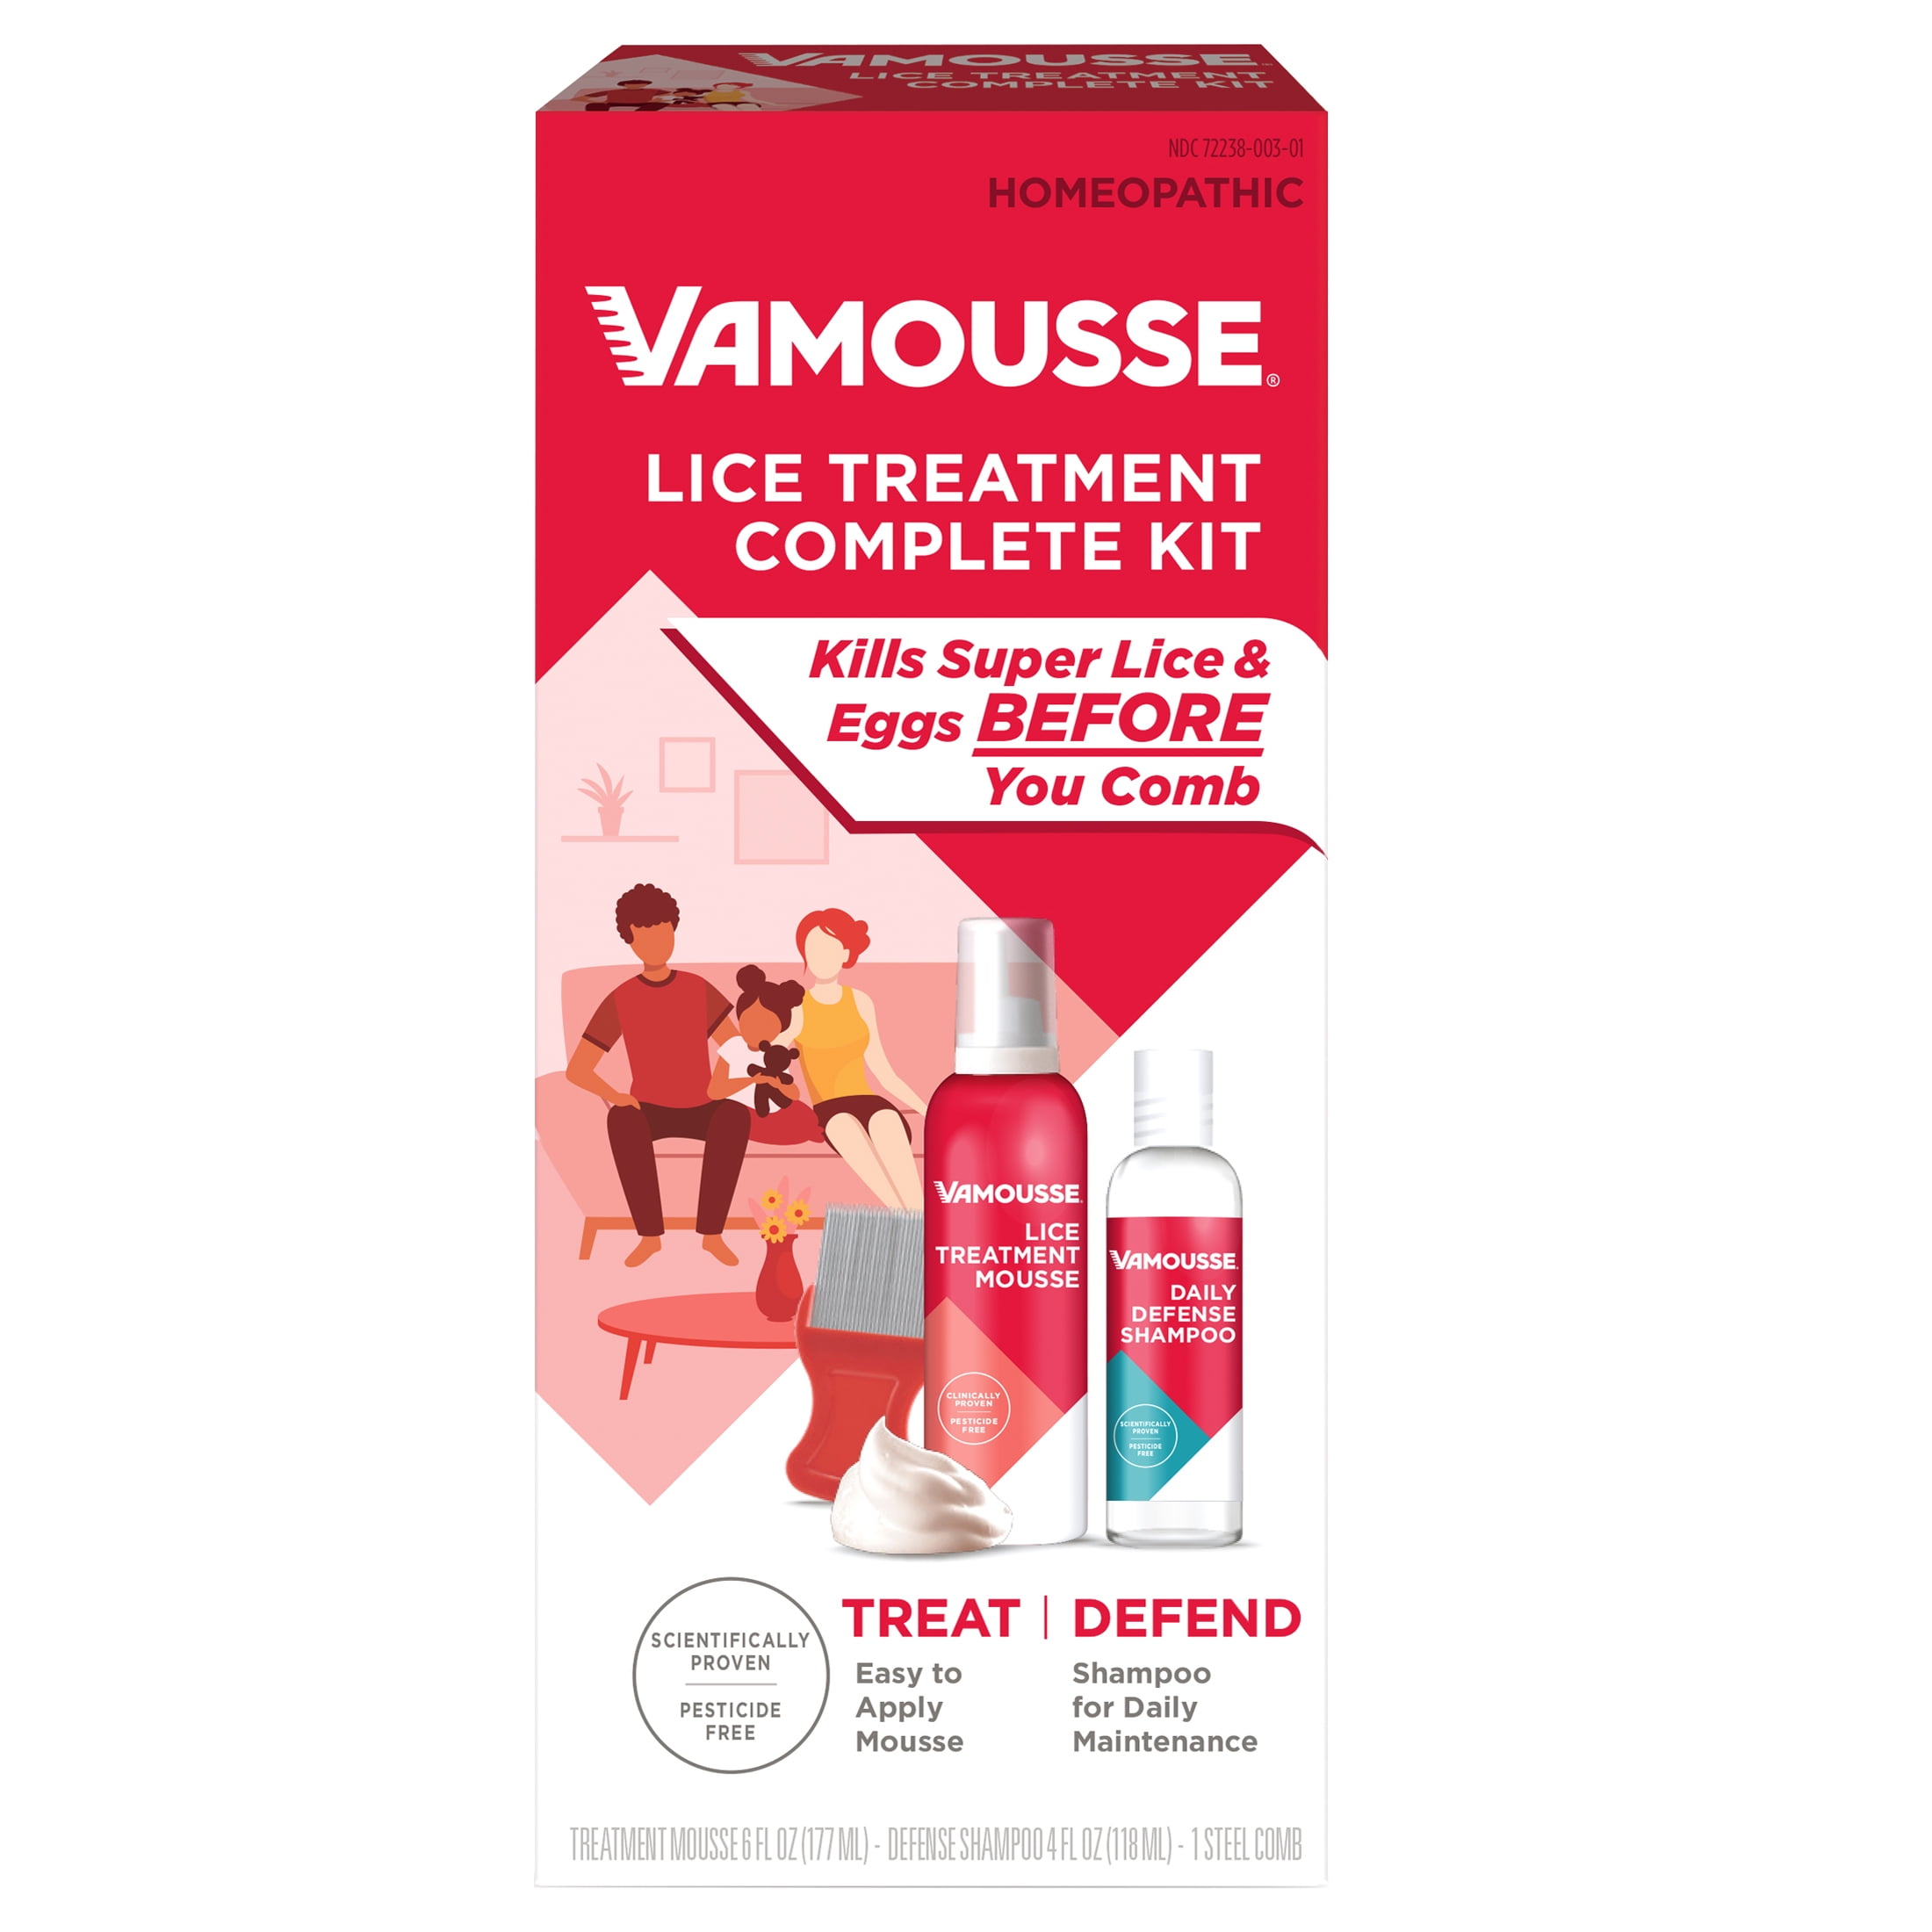 Vamousse Complete Lice Kit With Treatment Mousse, Daily Shampoo & Lice Comb, Kills Super Lice & Eggs